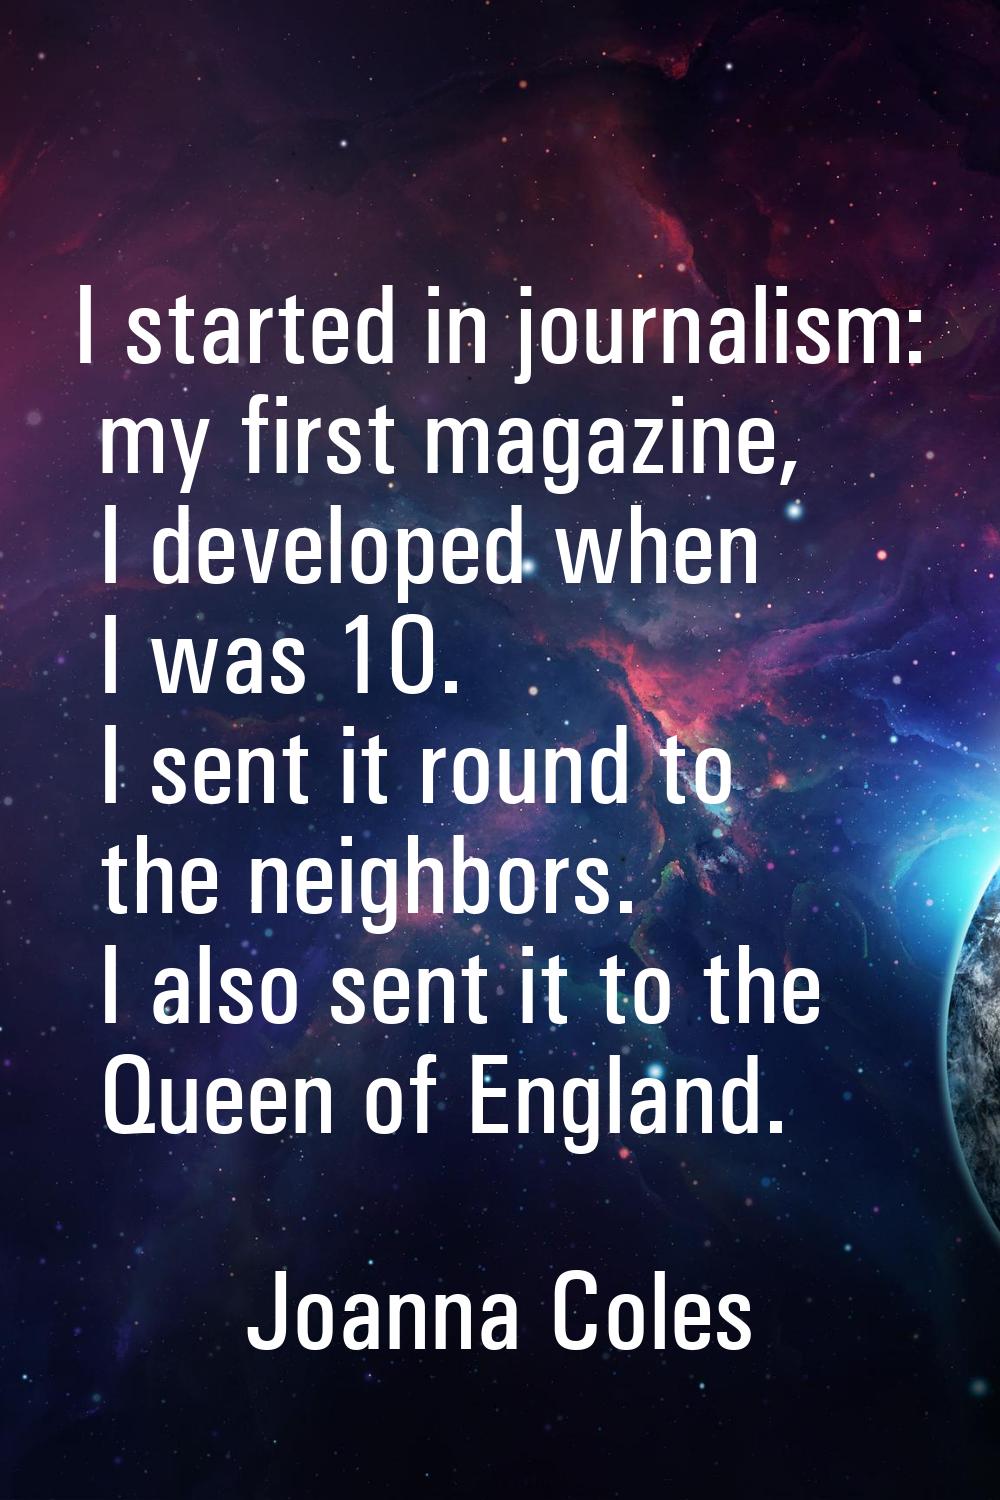 I started in journalism: my first magazine, I developed when I was 10. I sent it round to the neigh